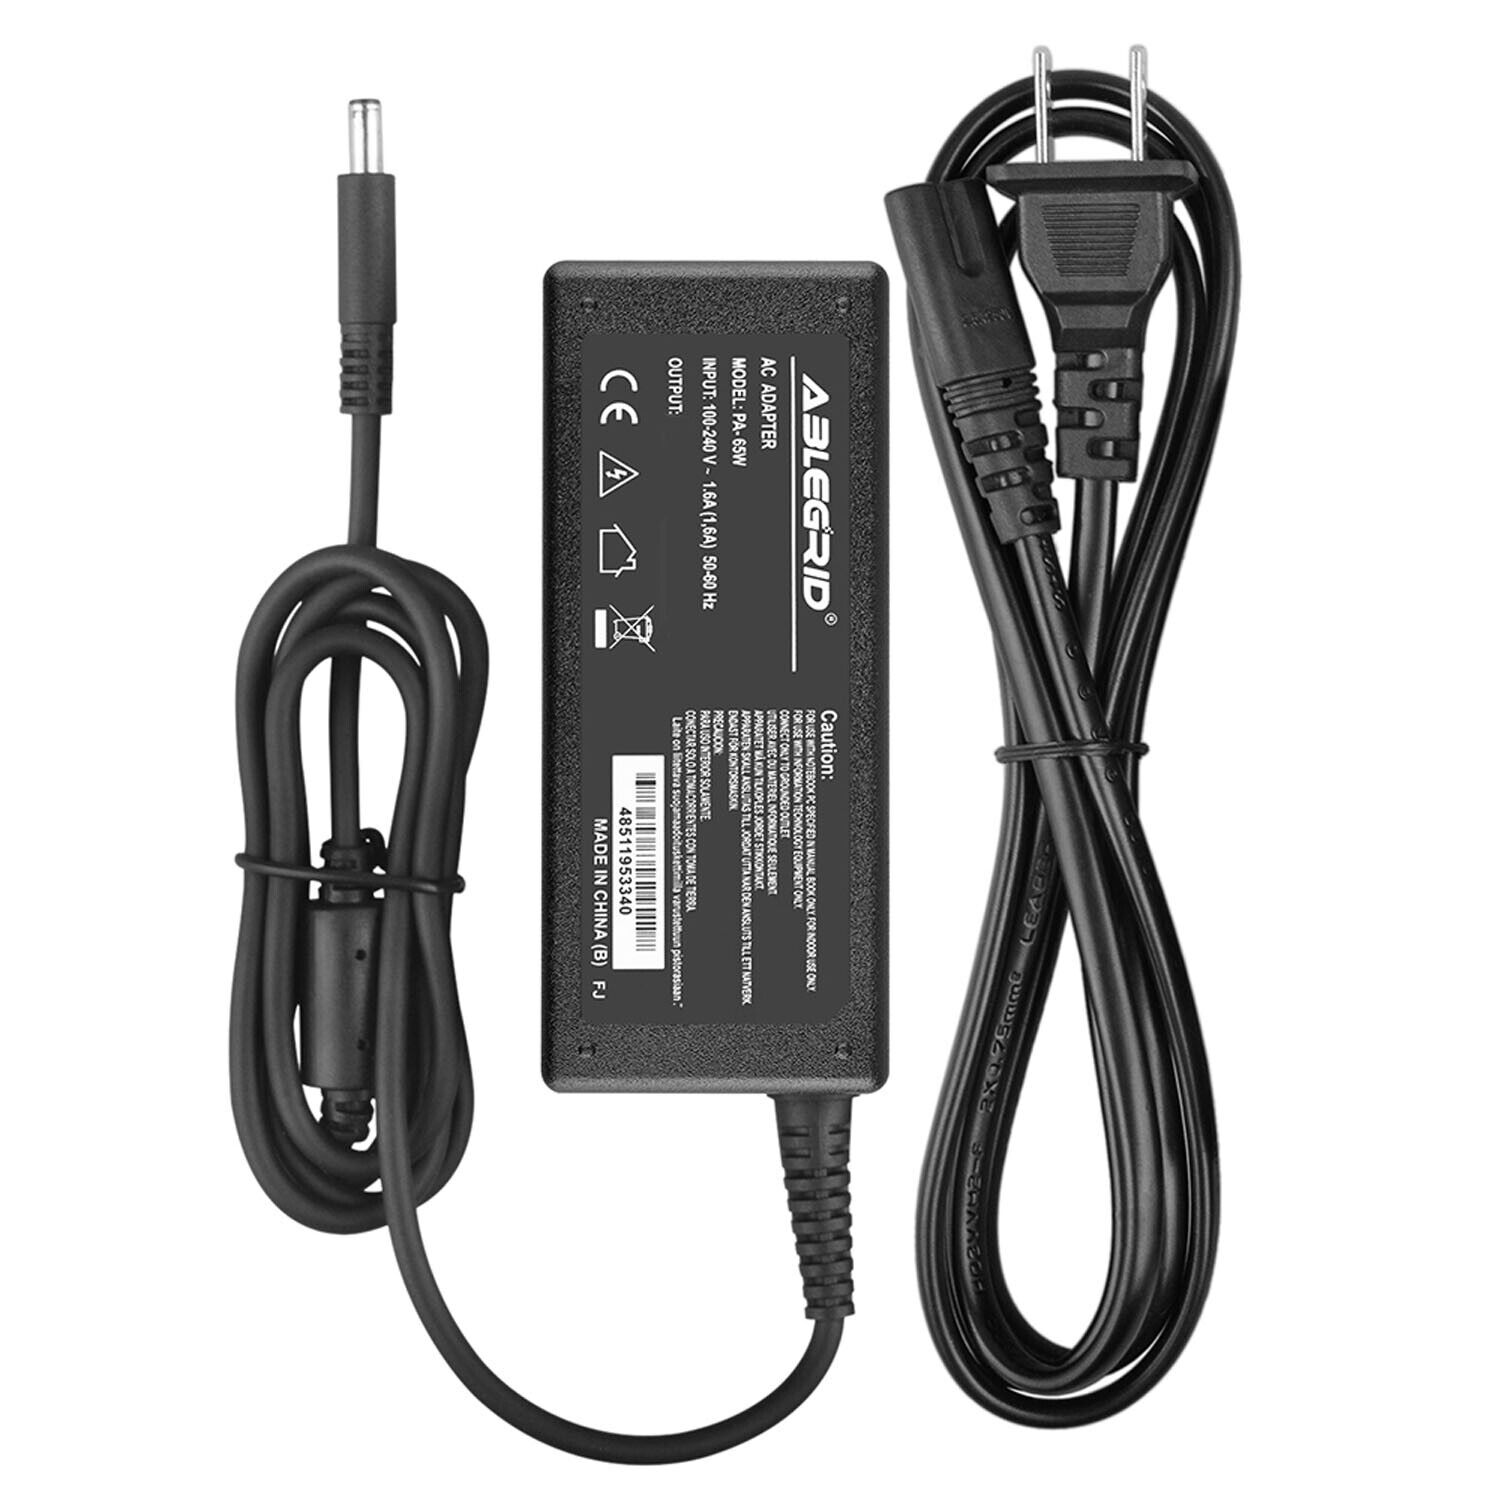 AC Adapter For ASUS F502CA-EB31 F502CA-EB91 Laptop Power Cord Battery Charger US